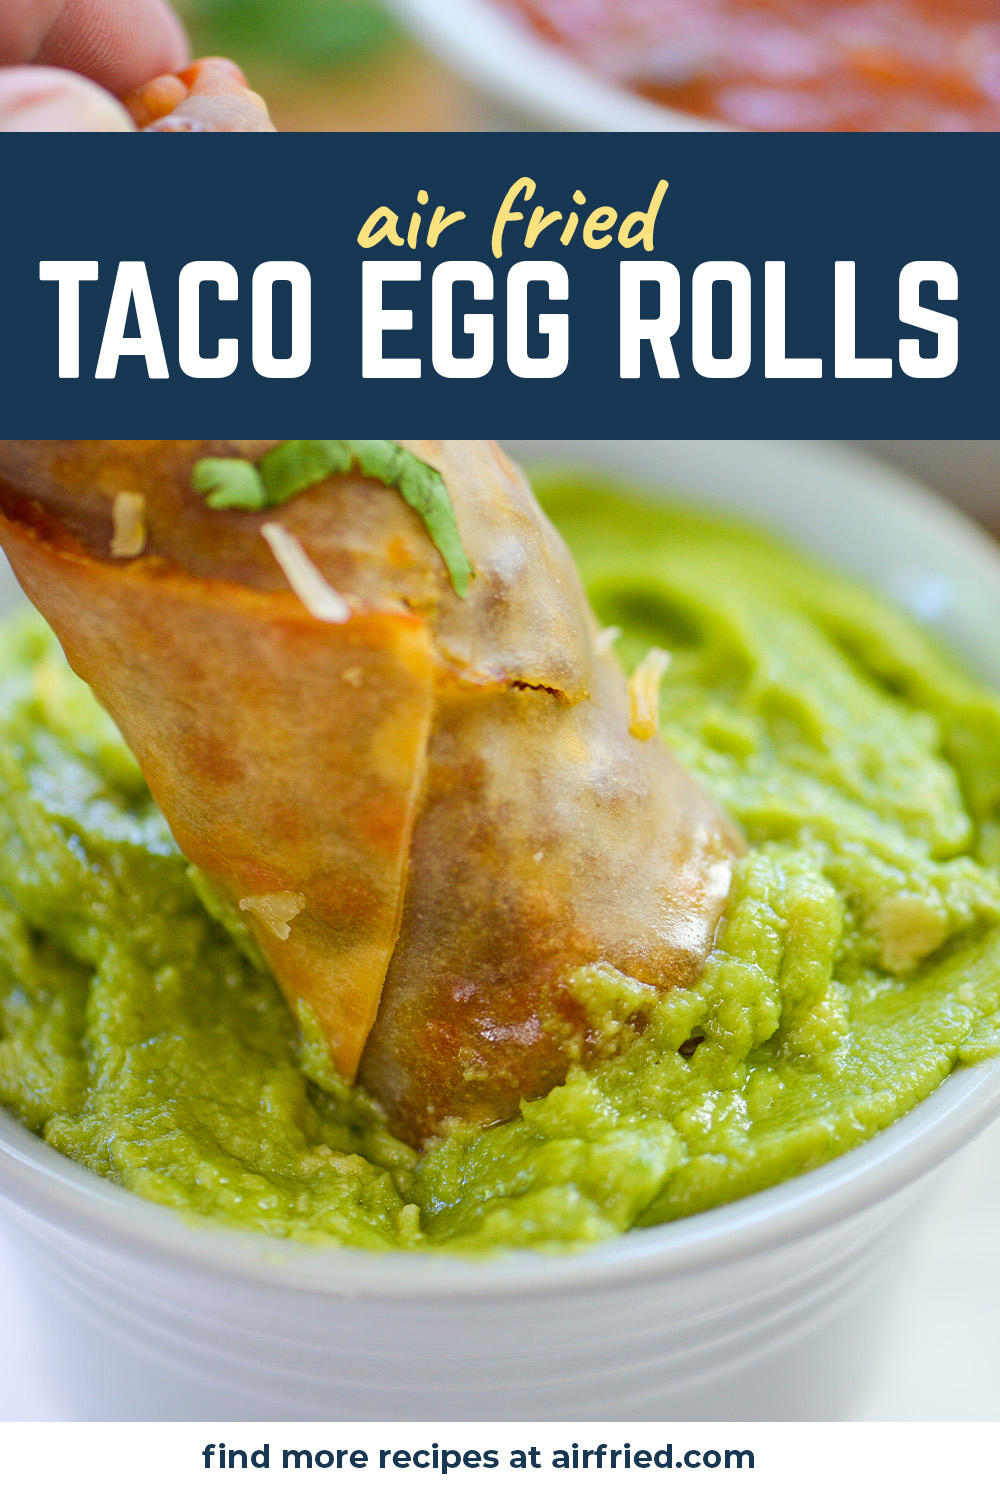 The egg roll is the perfect shell for a taco!  This recipe makes it super easy to make taco egg rolls in an air fryer!